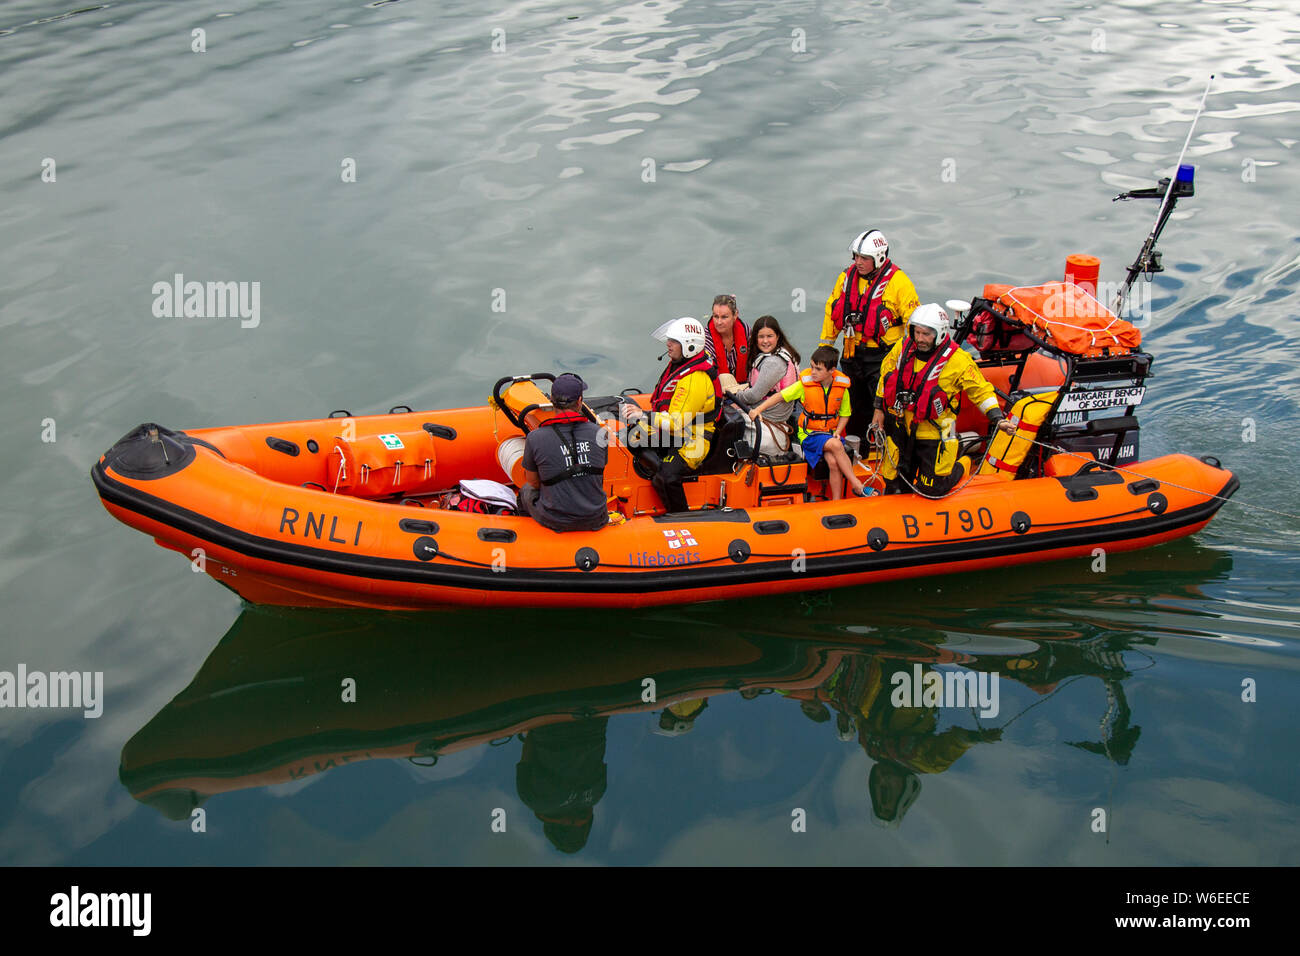 Family Recued by RNLI Royal National Lifeboat Institution Stock Photo